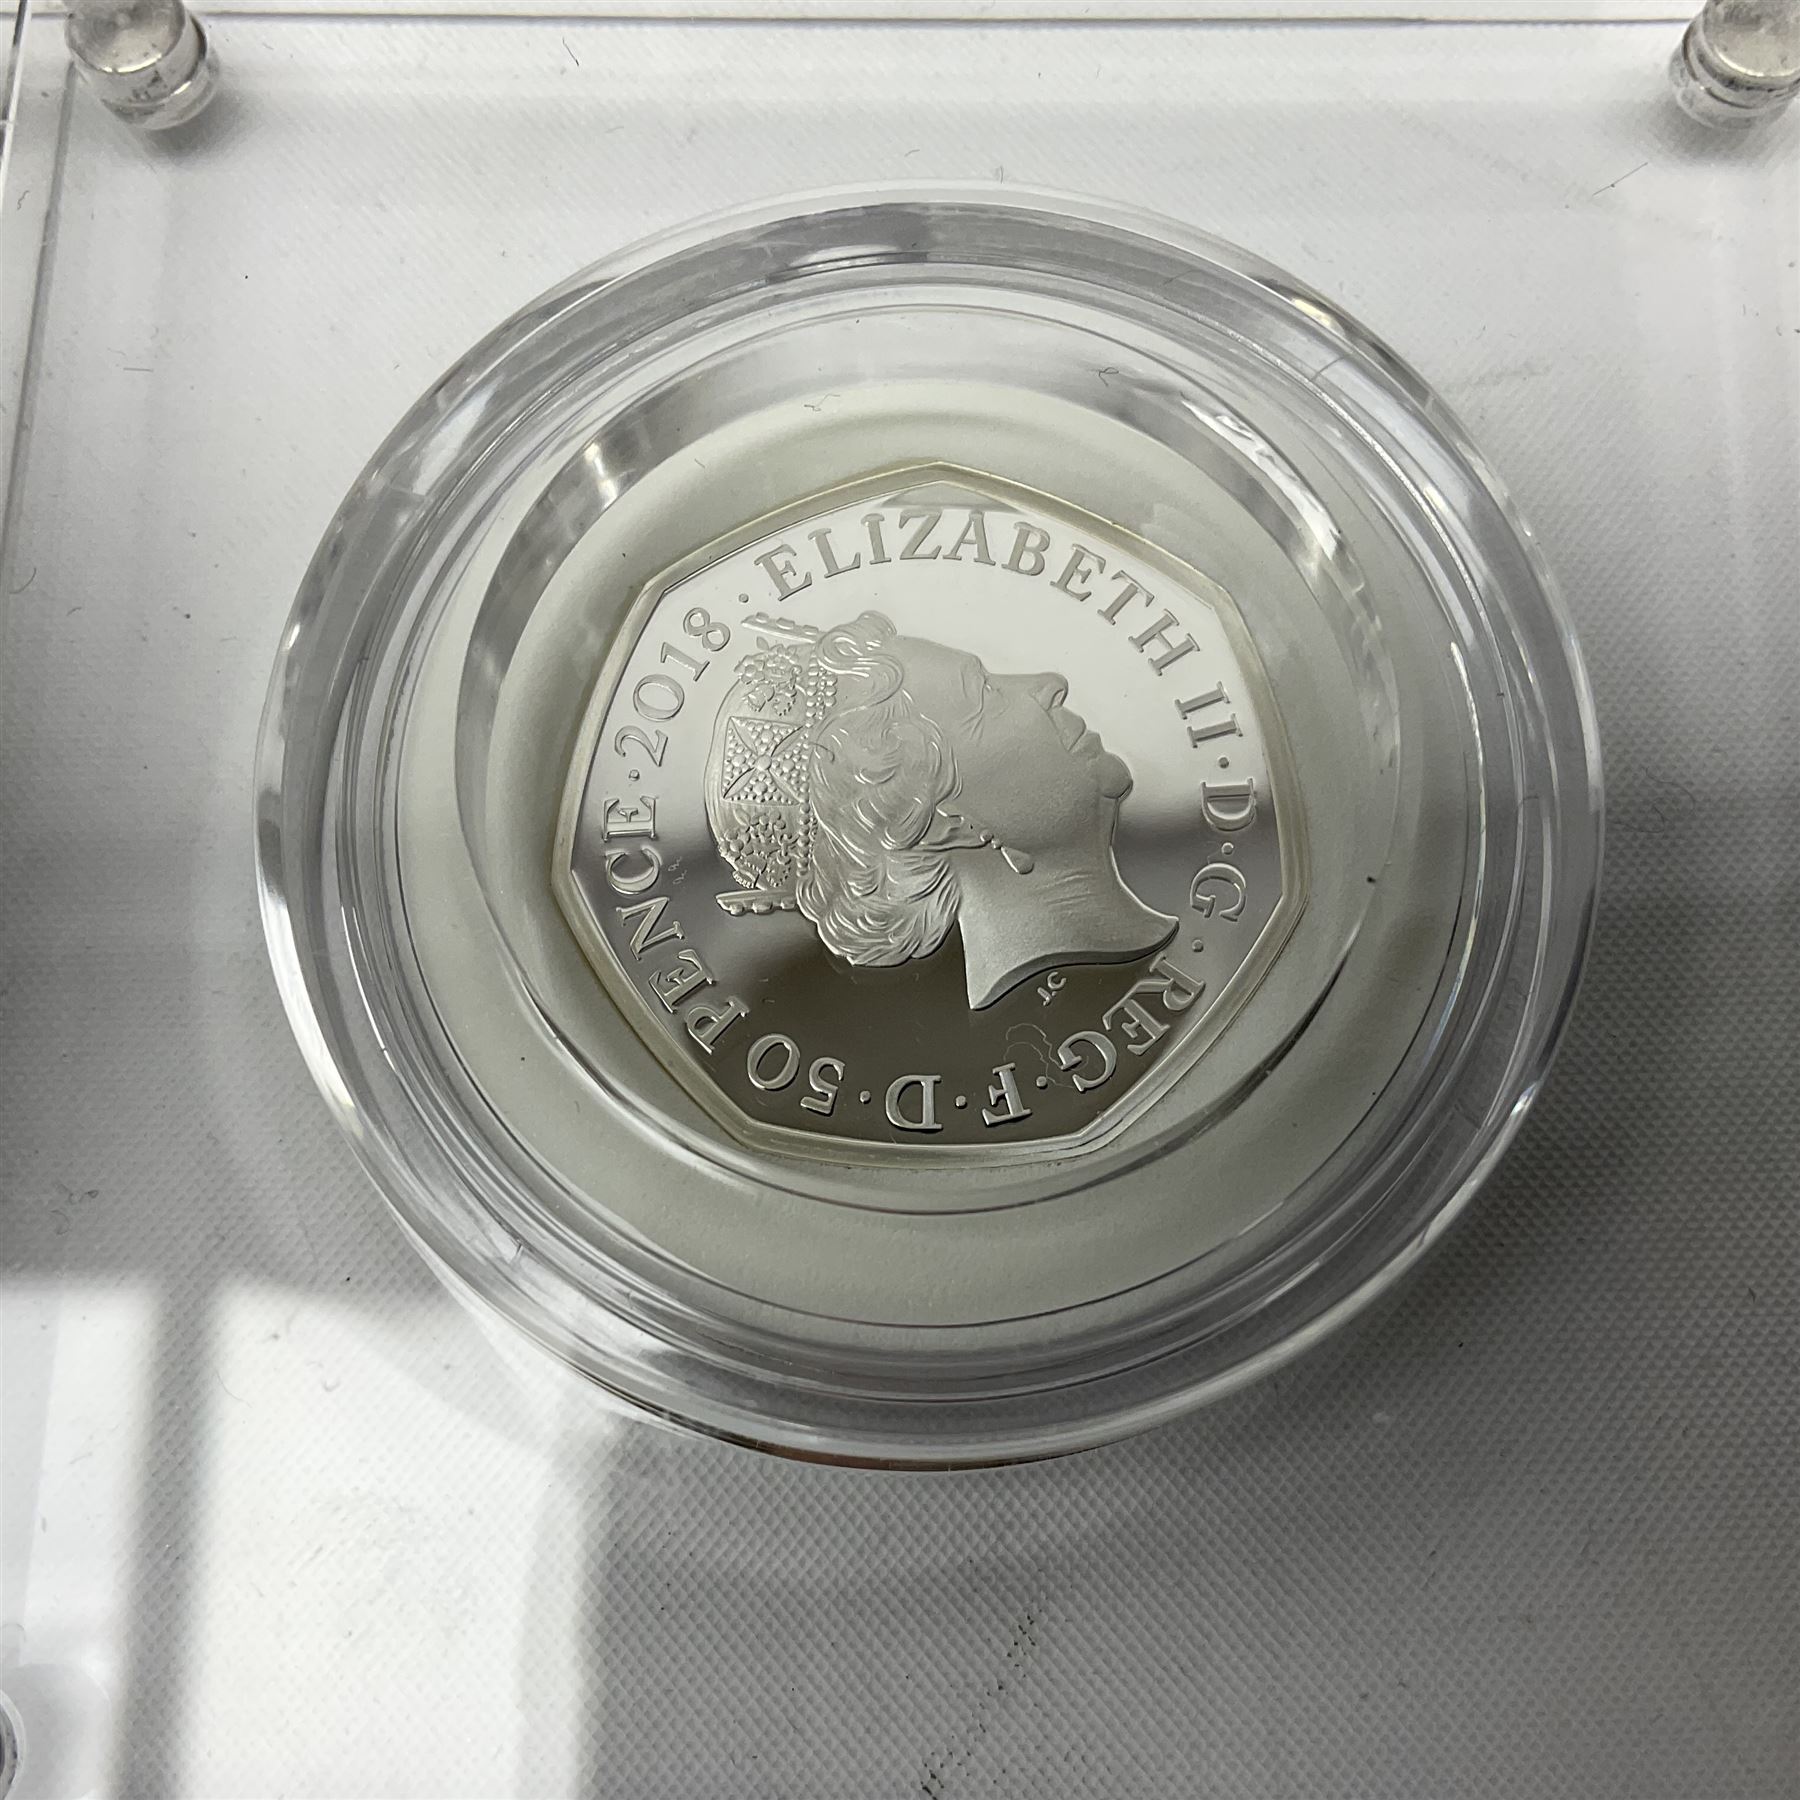 The Royal Mint United Kingdom 2018 'Mrs Tittlemouse' silver proof fifty pence coin - Image 3 of 4